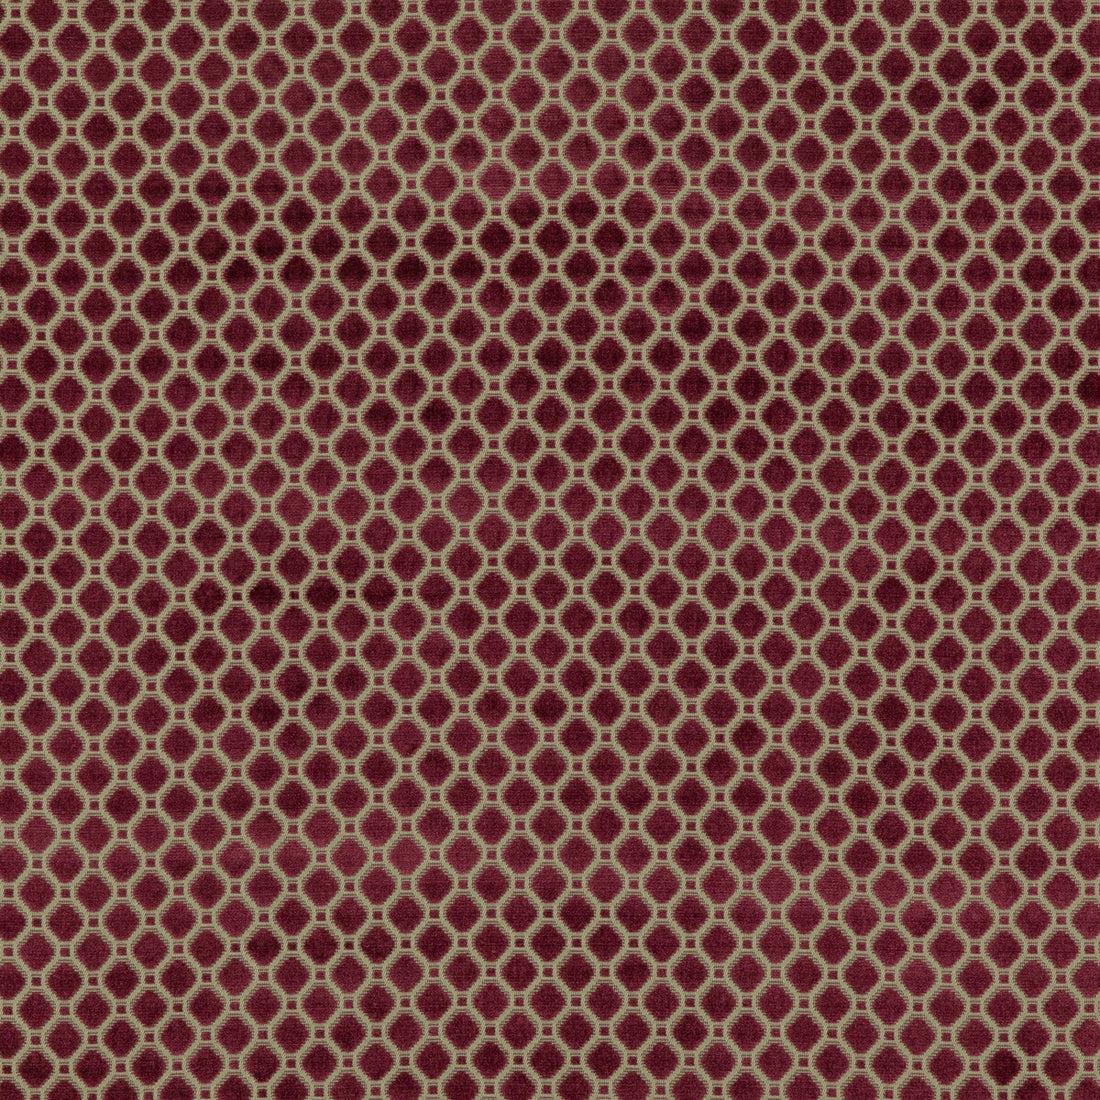 Indus Velvet fabric in berry color - pattern BF10826.474.0 - by G P &amp; J Baker in the Coromandel Velvets collection